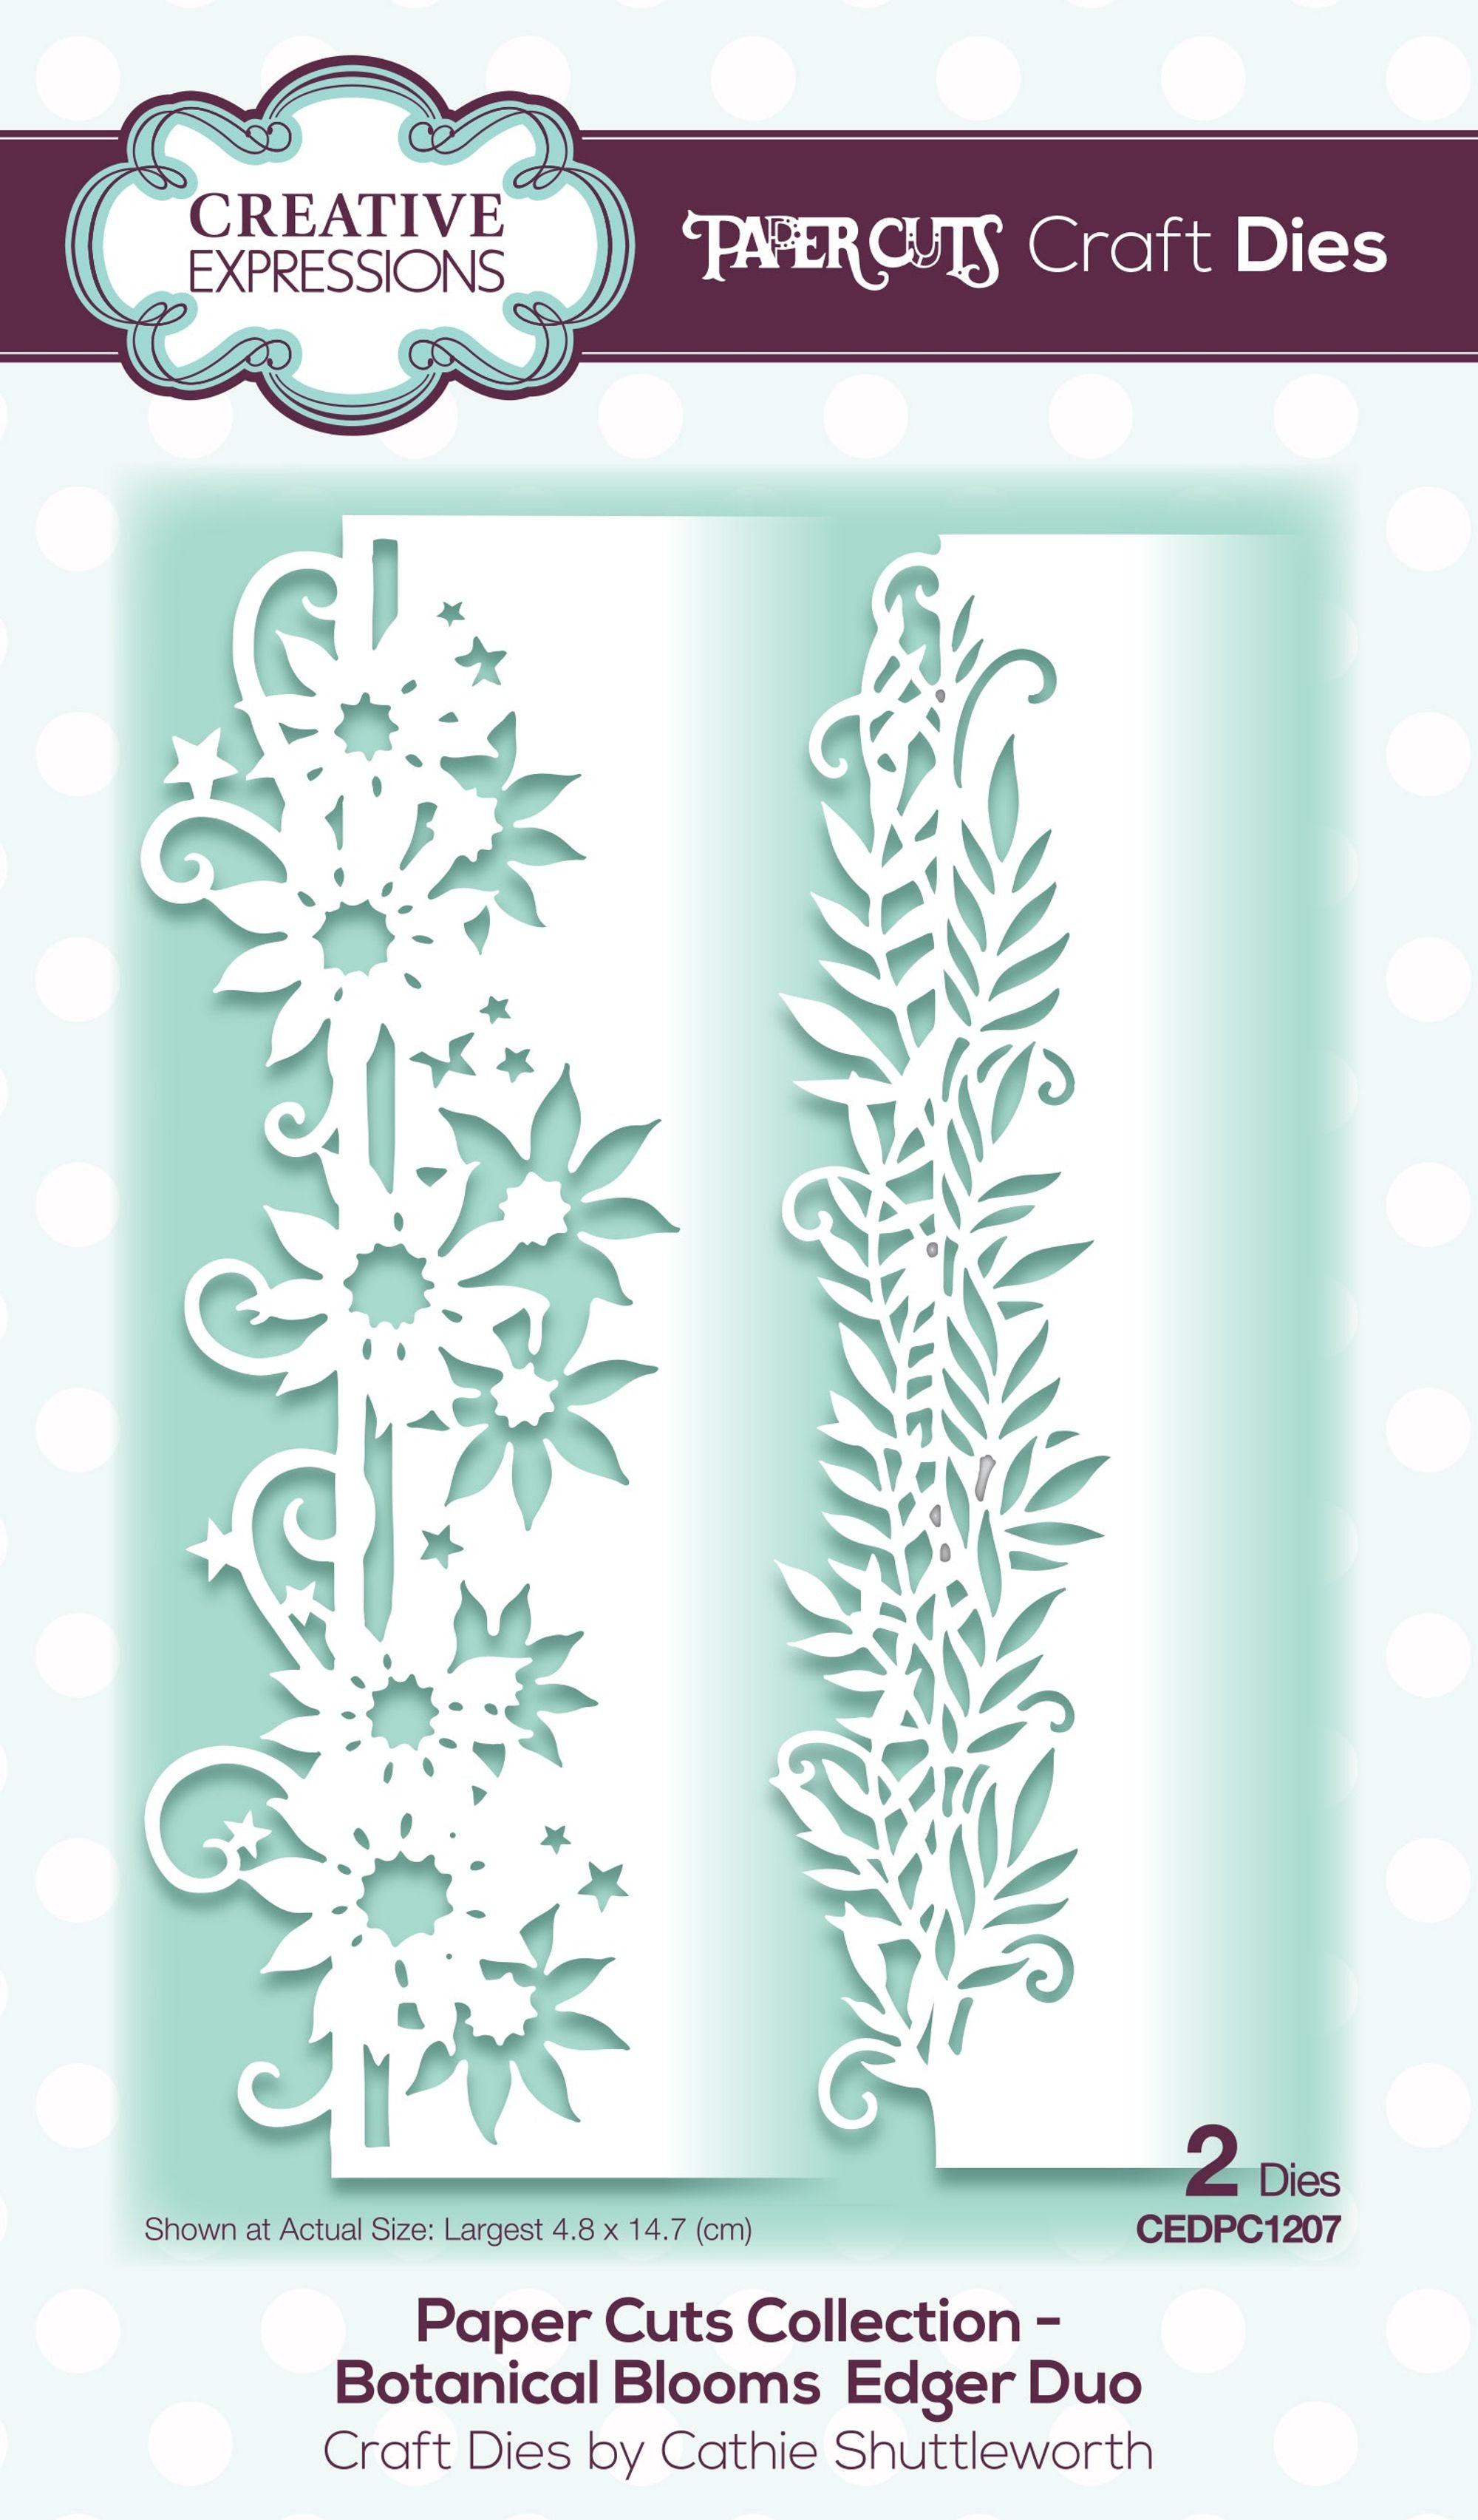 Creative Expressions Paper Cuts Botanical Blooms Edger Duo Craft Die